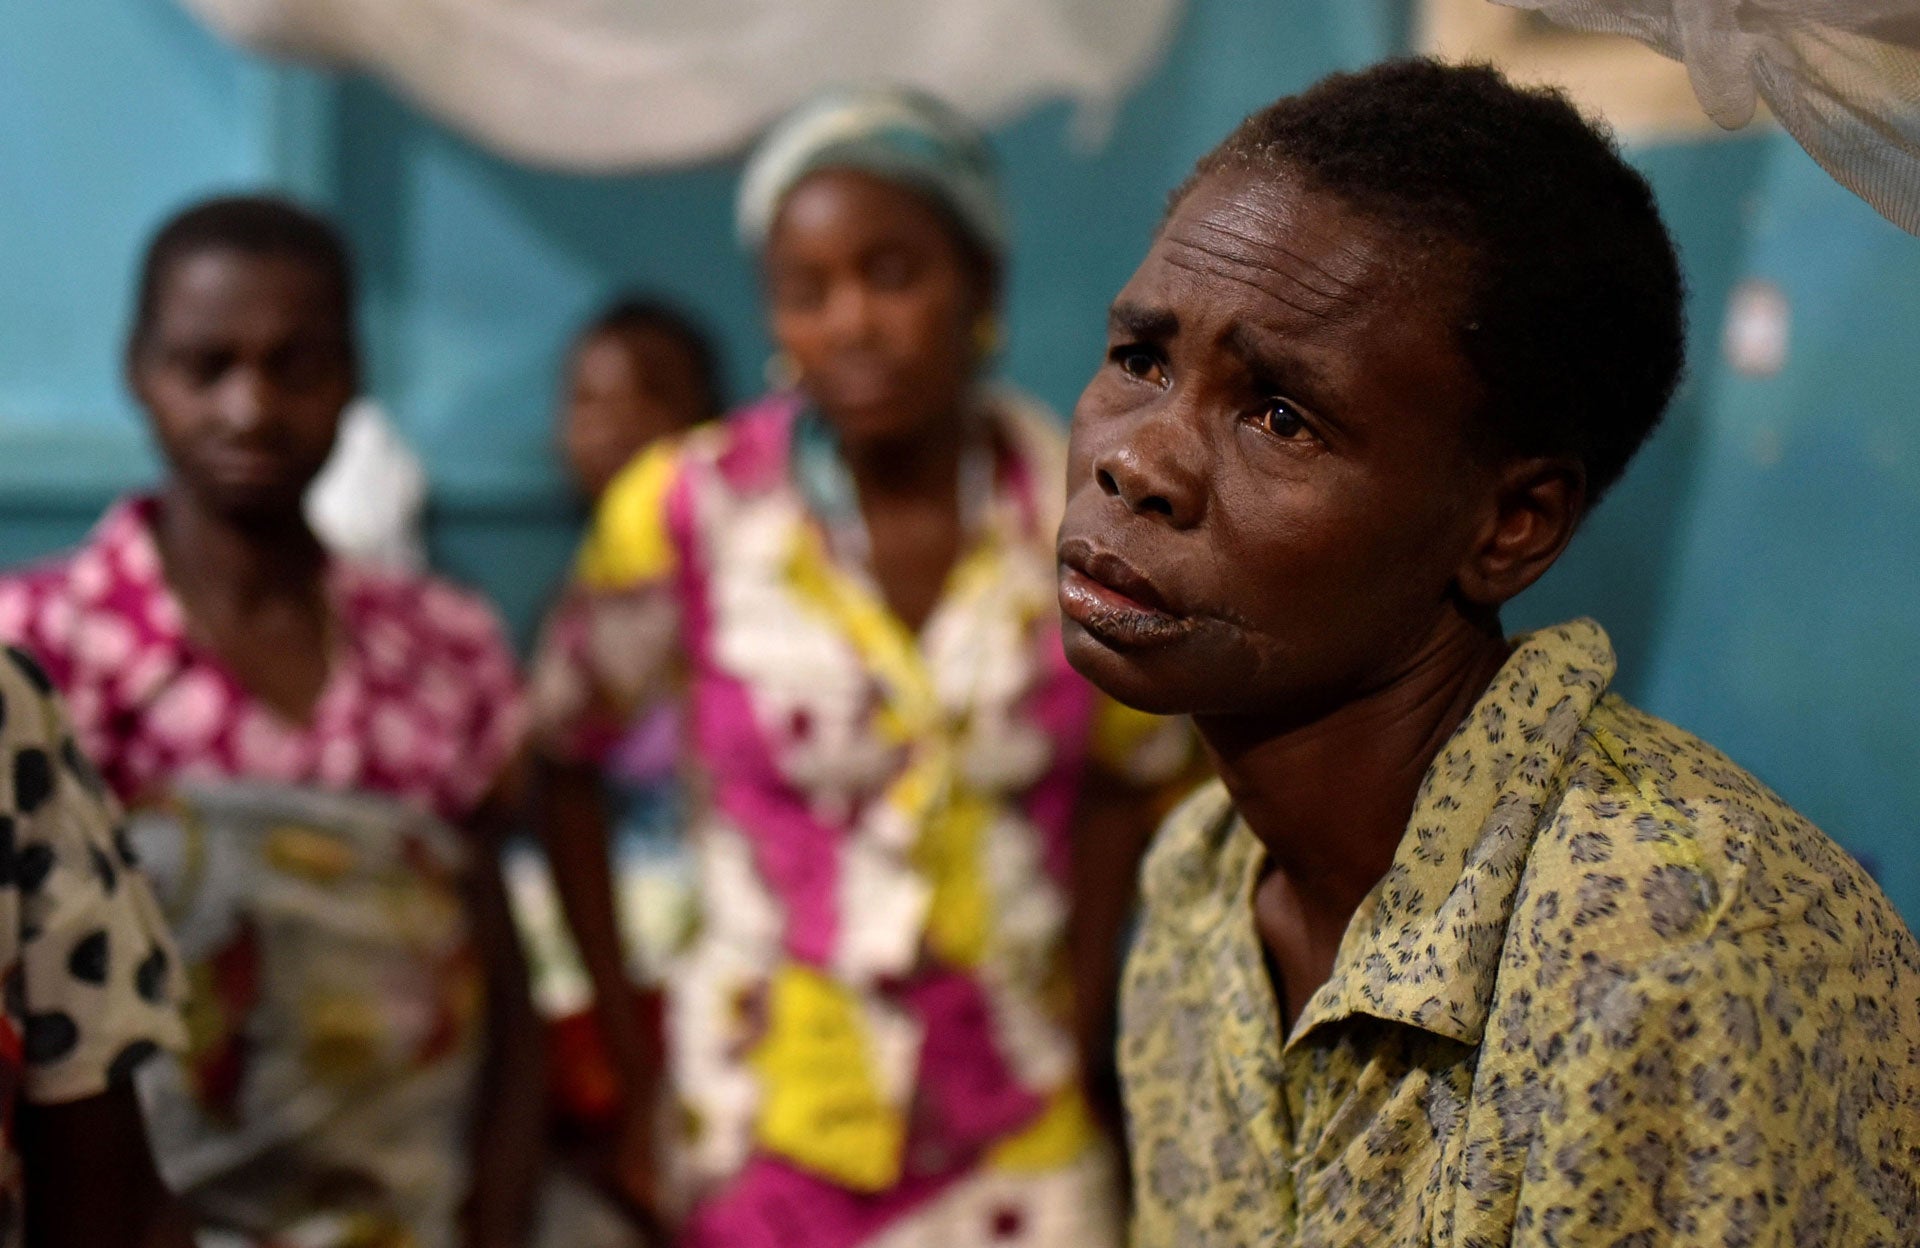 A Congolese victim of ethnic violence rests inside a ward at the General Hospital in Bunia, Ituri province in the eastern Democratic Republic of Congo June 25, 2019.